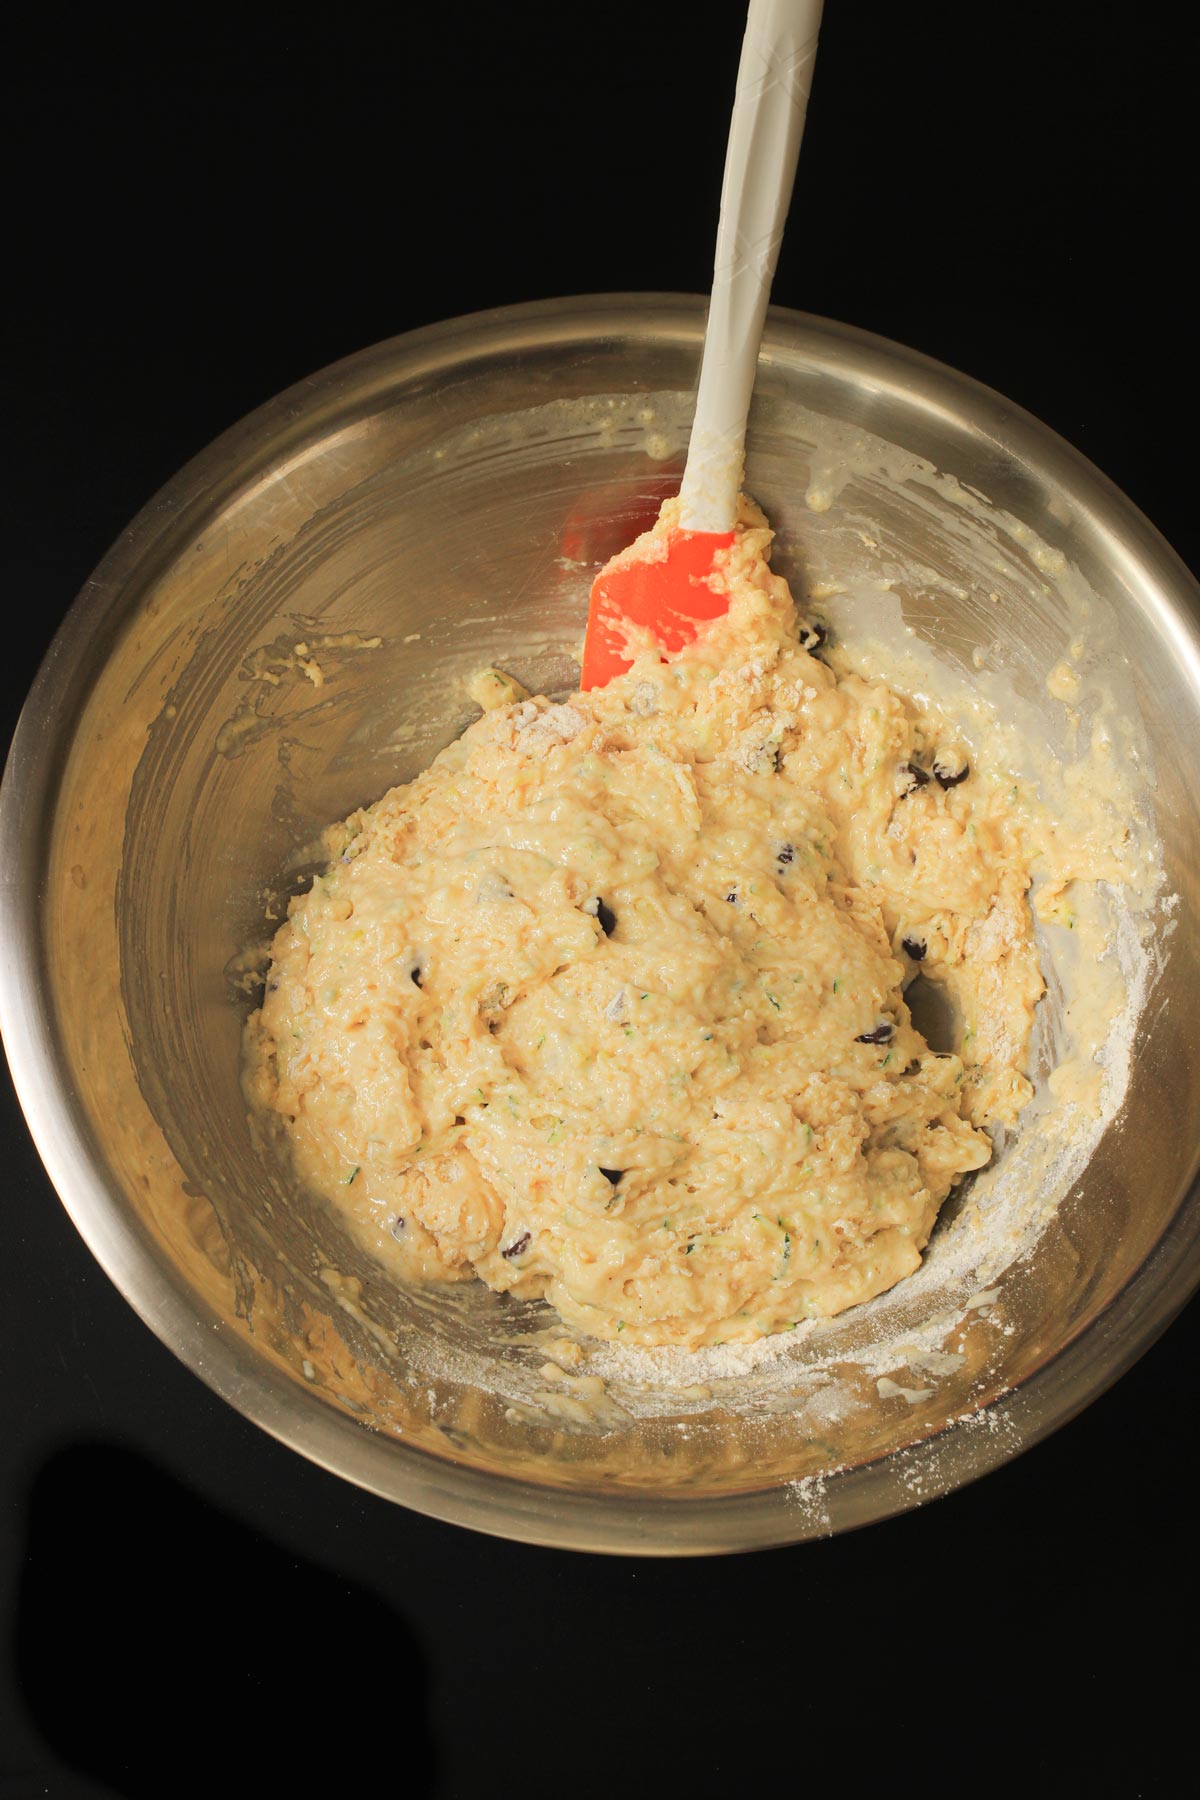 the muffin batter assembled in the metal bowl with a rubber spatula.